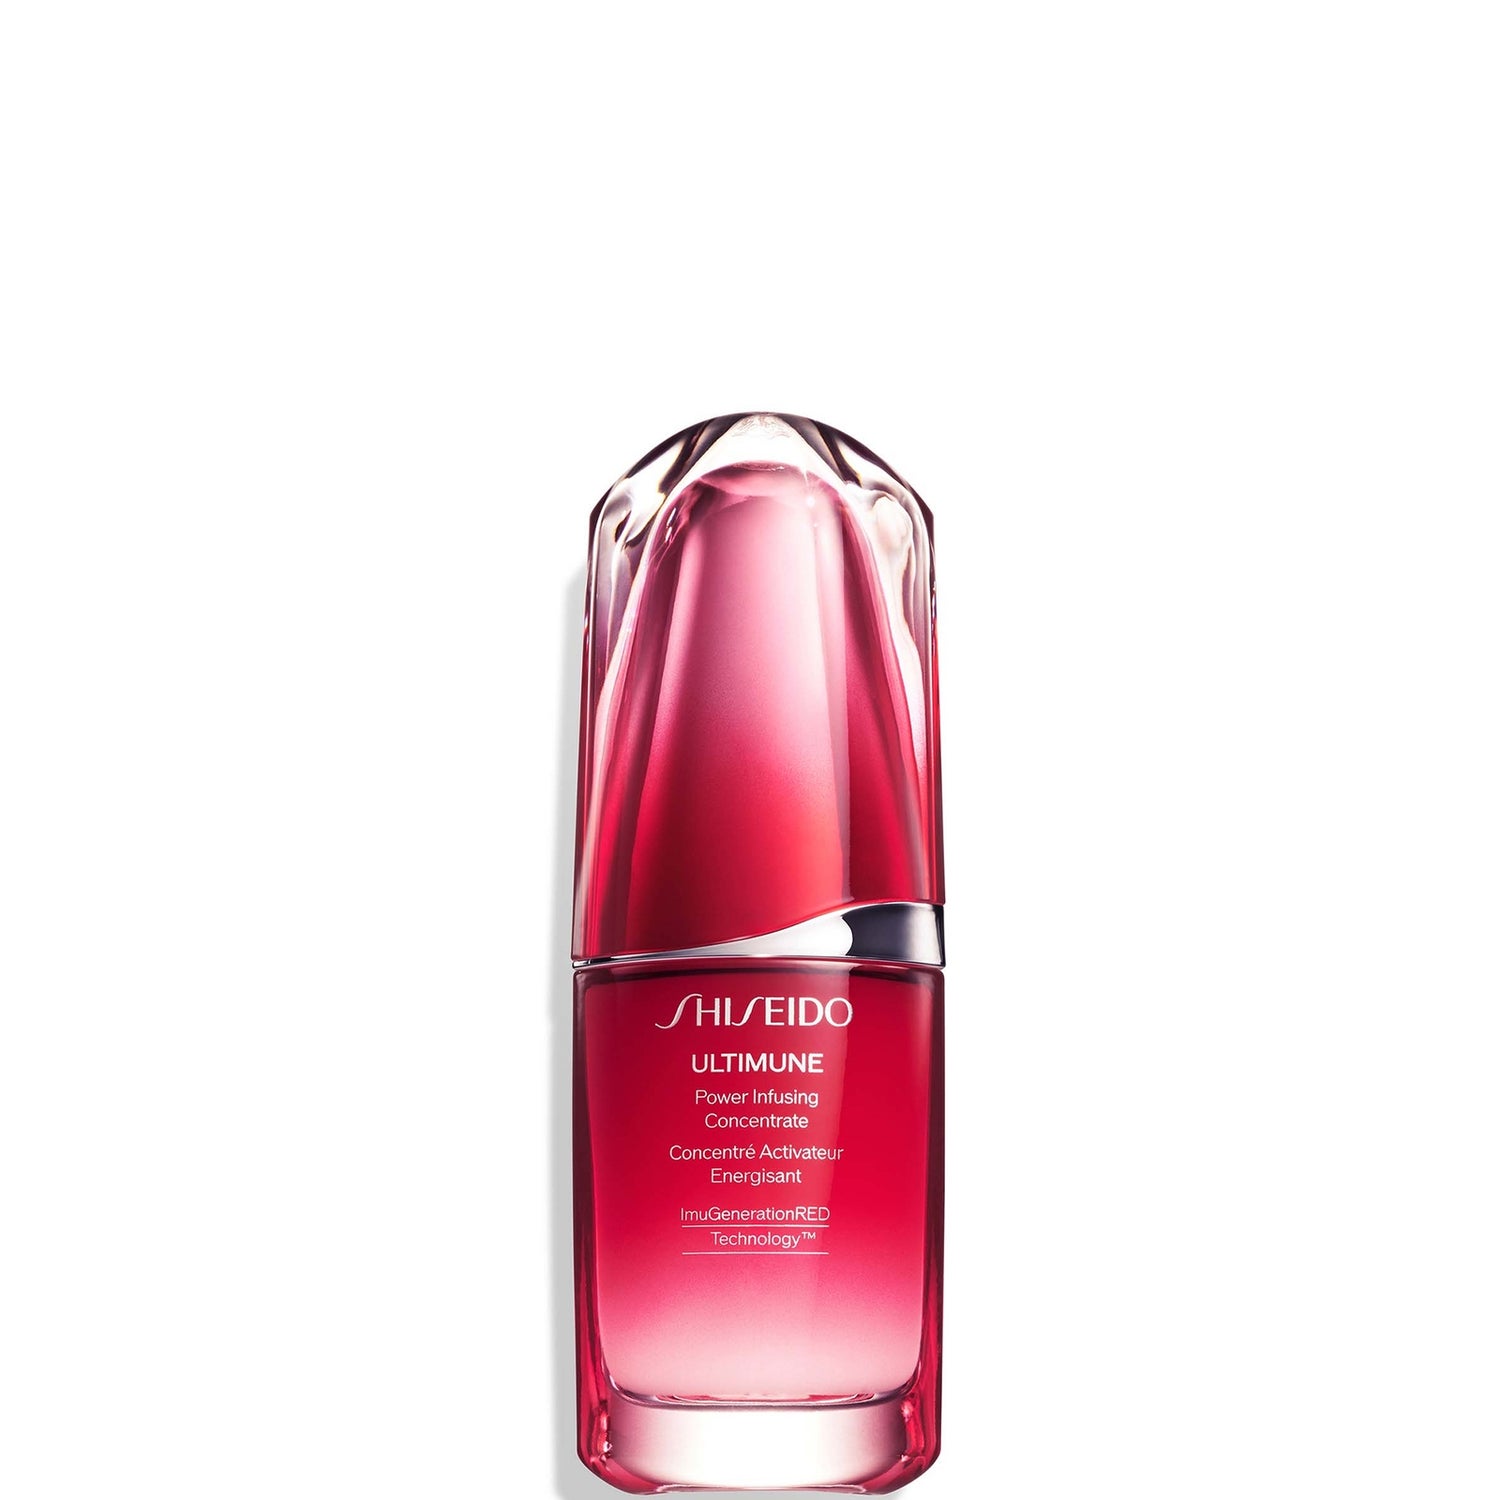 Concentrate Exclusive Ultimune Power Infusing Shiseido (vari formati)